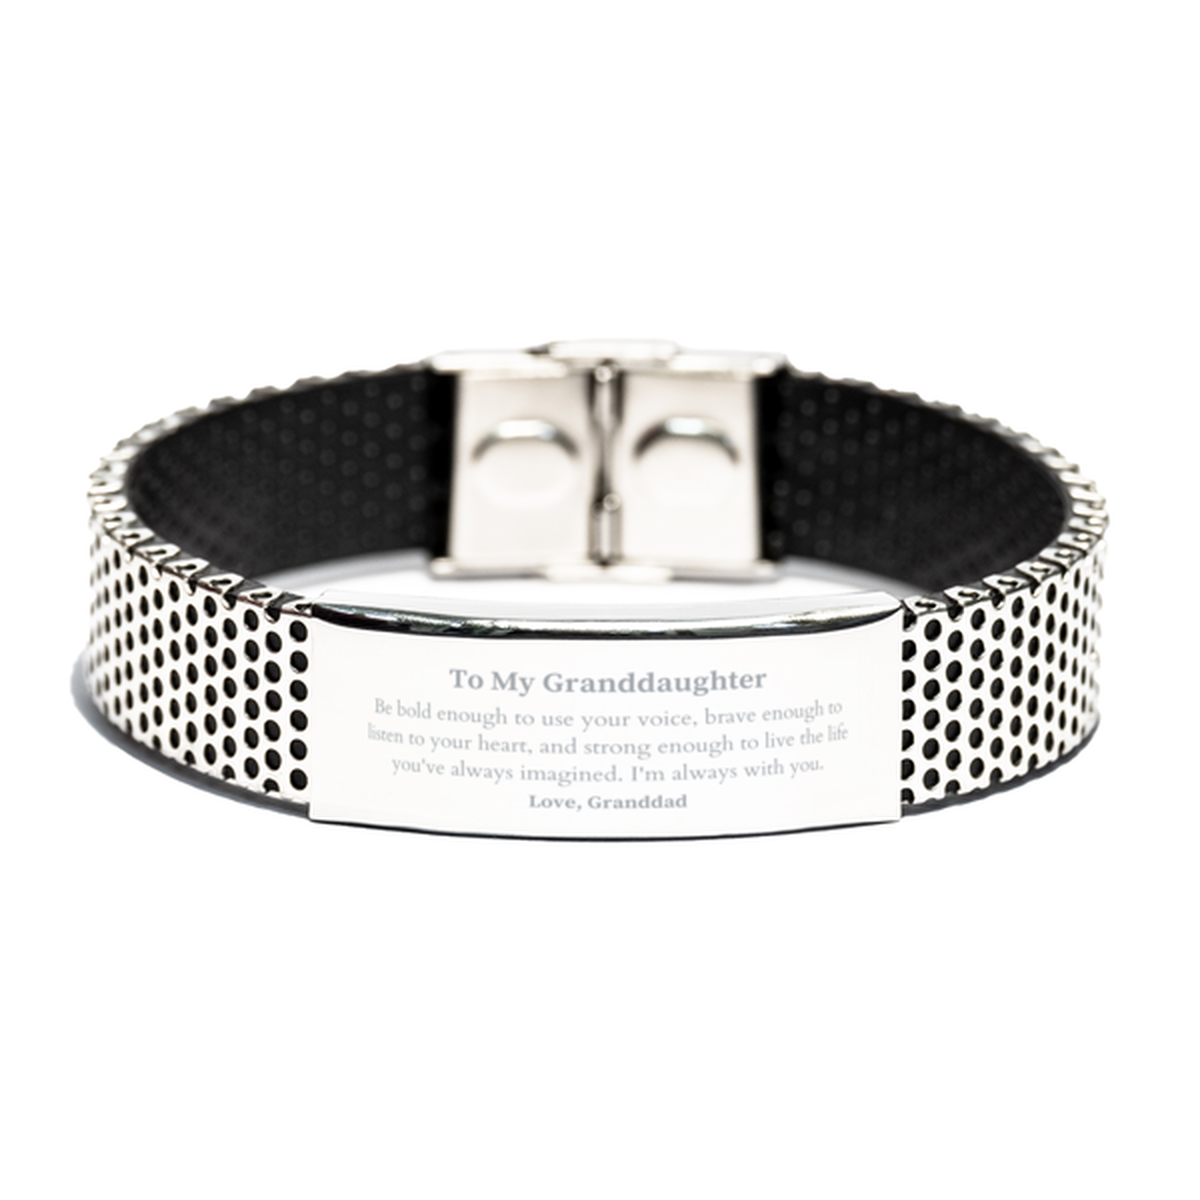 Keepsake Granddaughter Stainless Steel Bracelet Gift Idea Graduation Christmas Birthday Granddaughter from Granddad, Granddaughter Be bold enough to use your voice, brave enough to listen to your heart. Love, Granddad